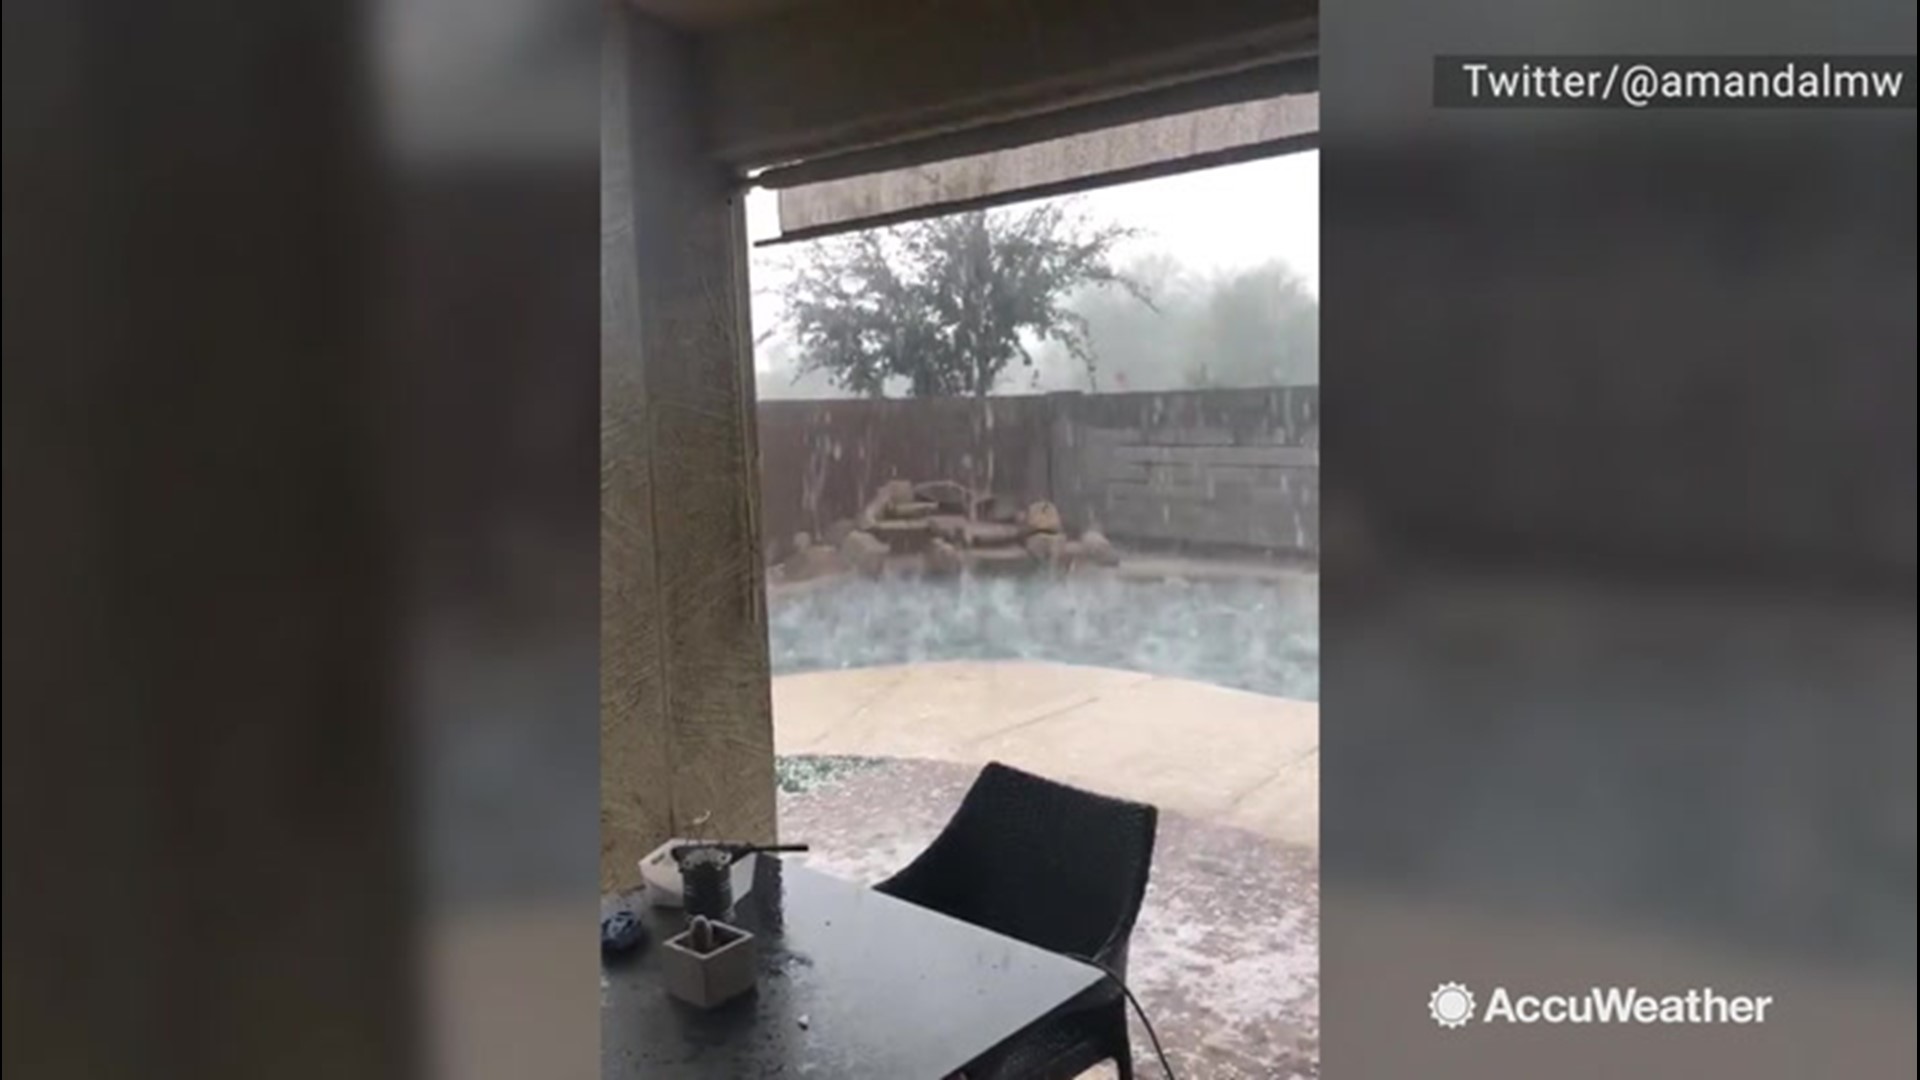 On Nov. 21, a storm rocked Goodyear, Arizona, with hail slightly larger than a dime. Just look at the splash they make in that pool!